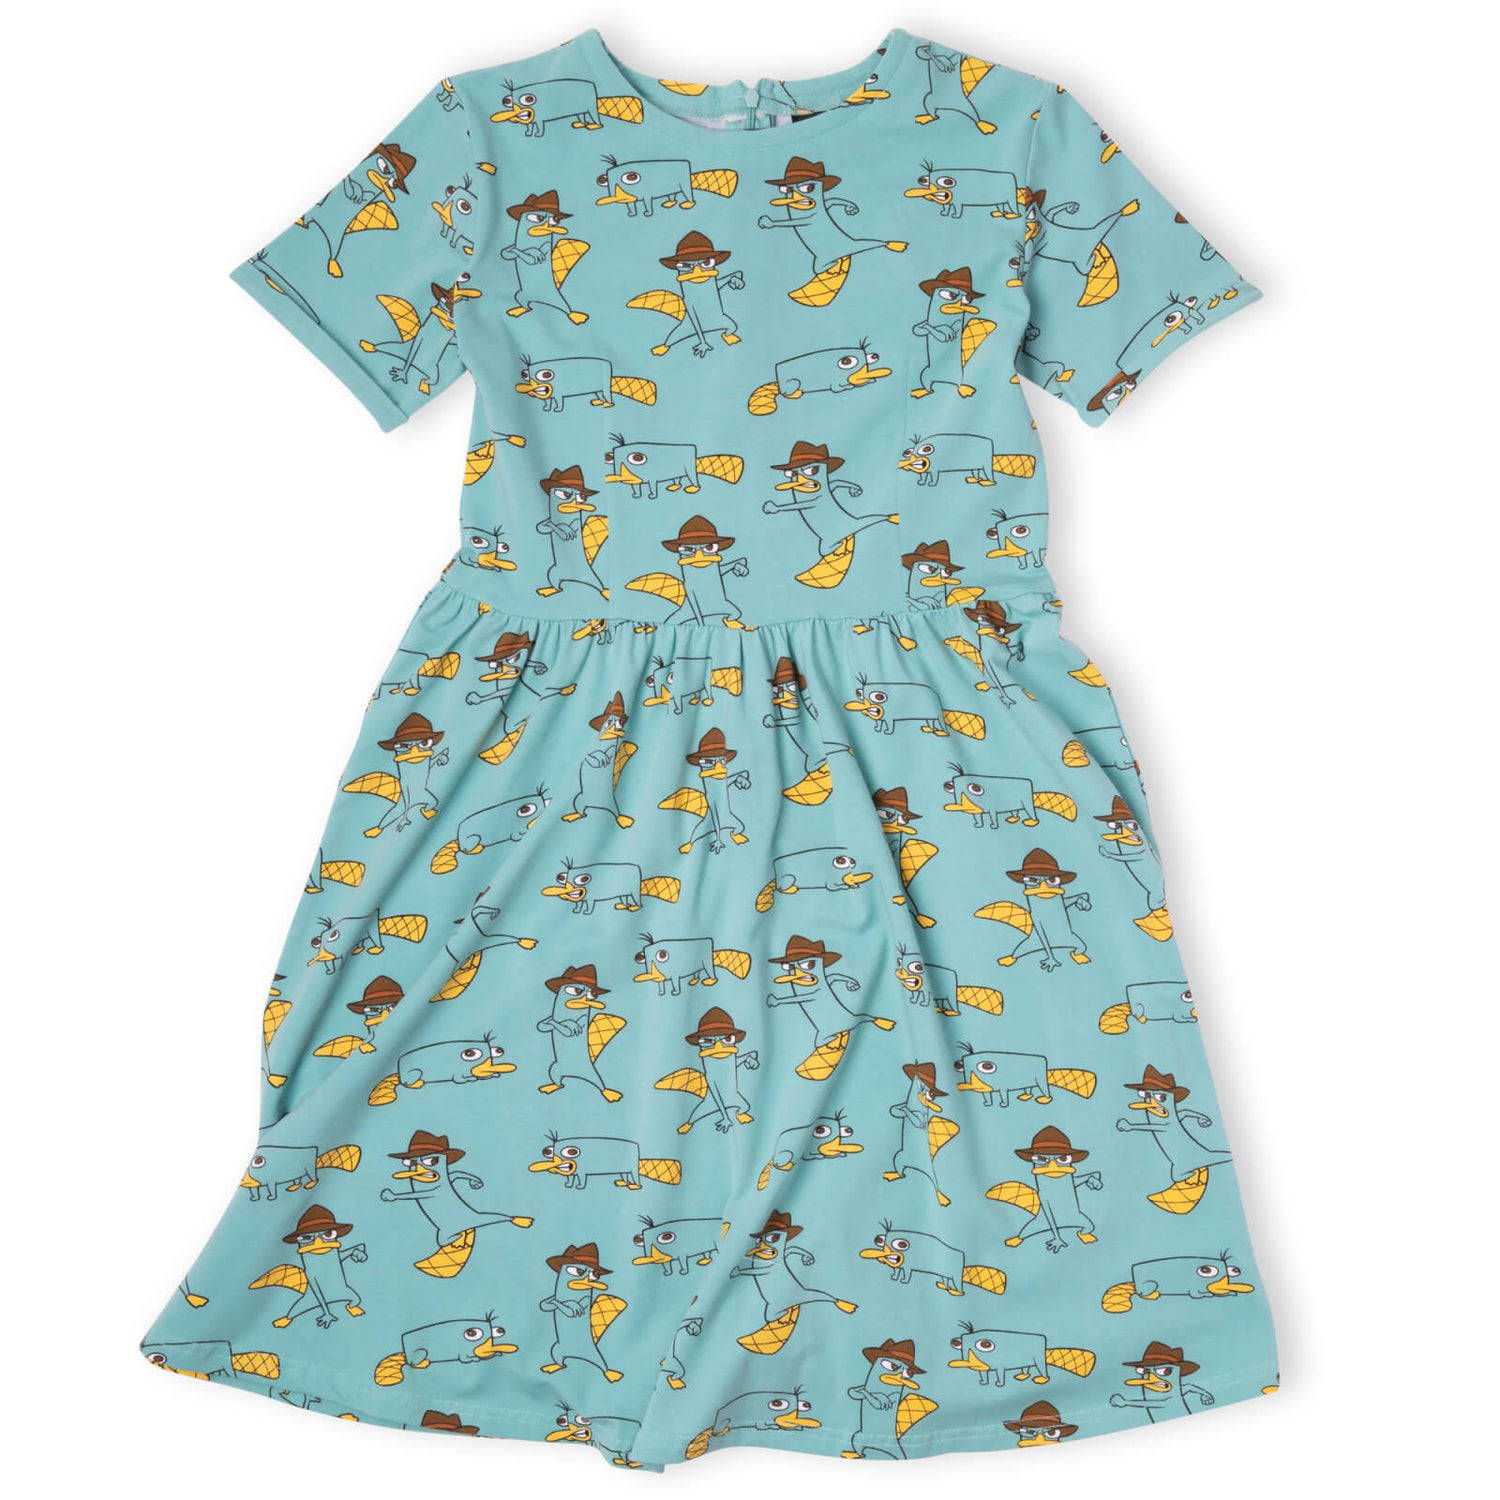 Cakeworthy Perry The Platypus Dress